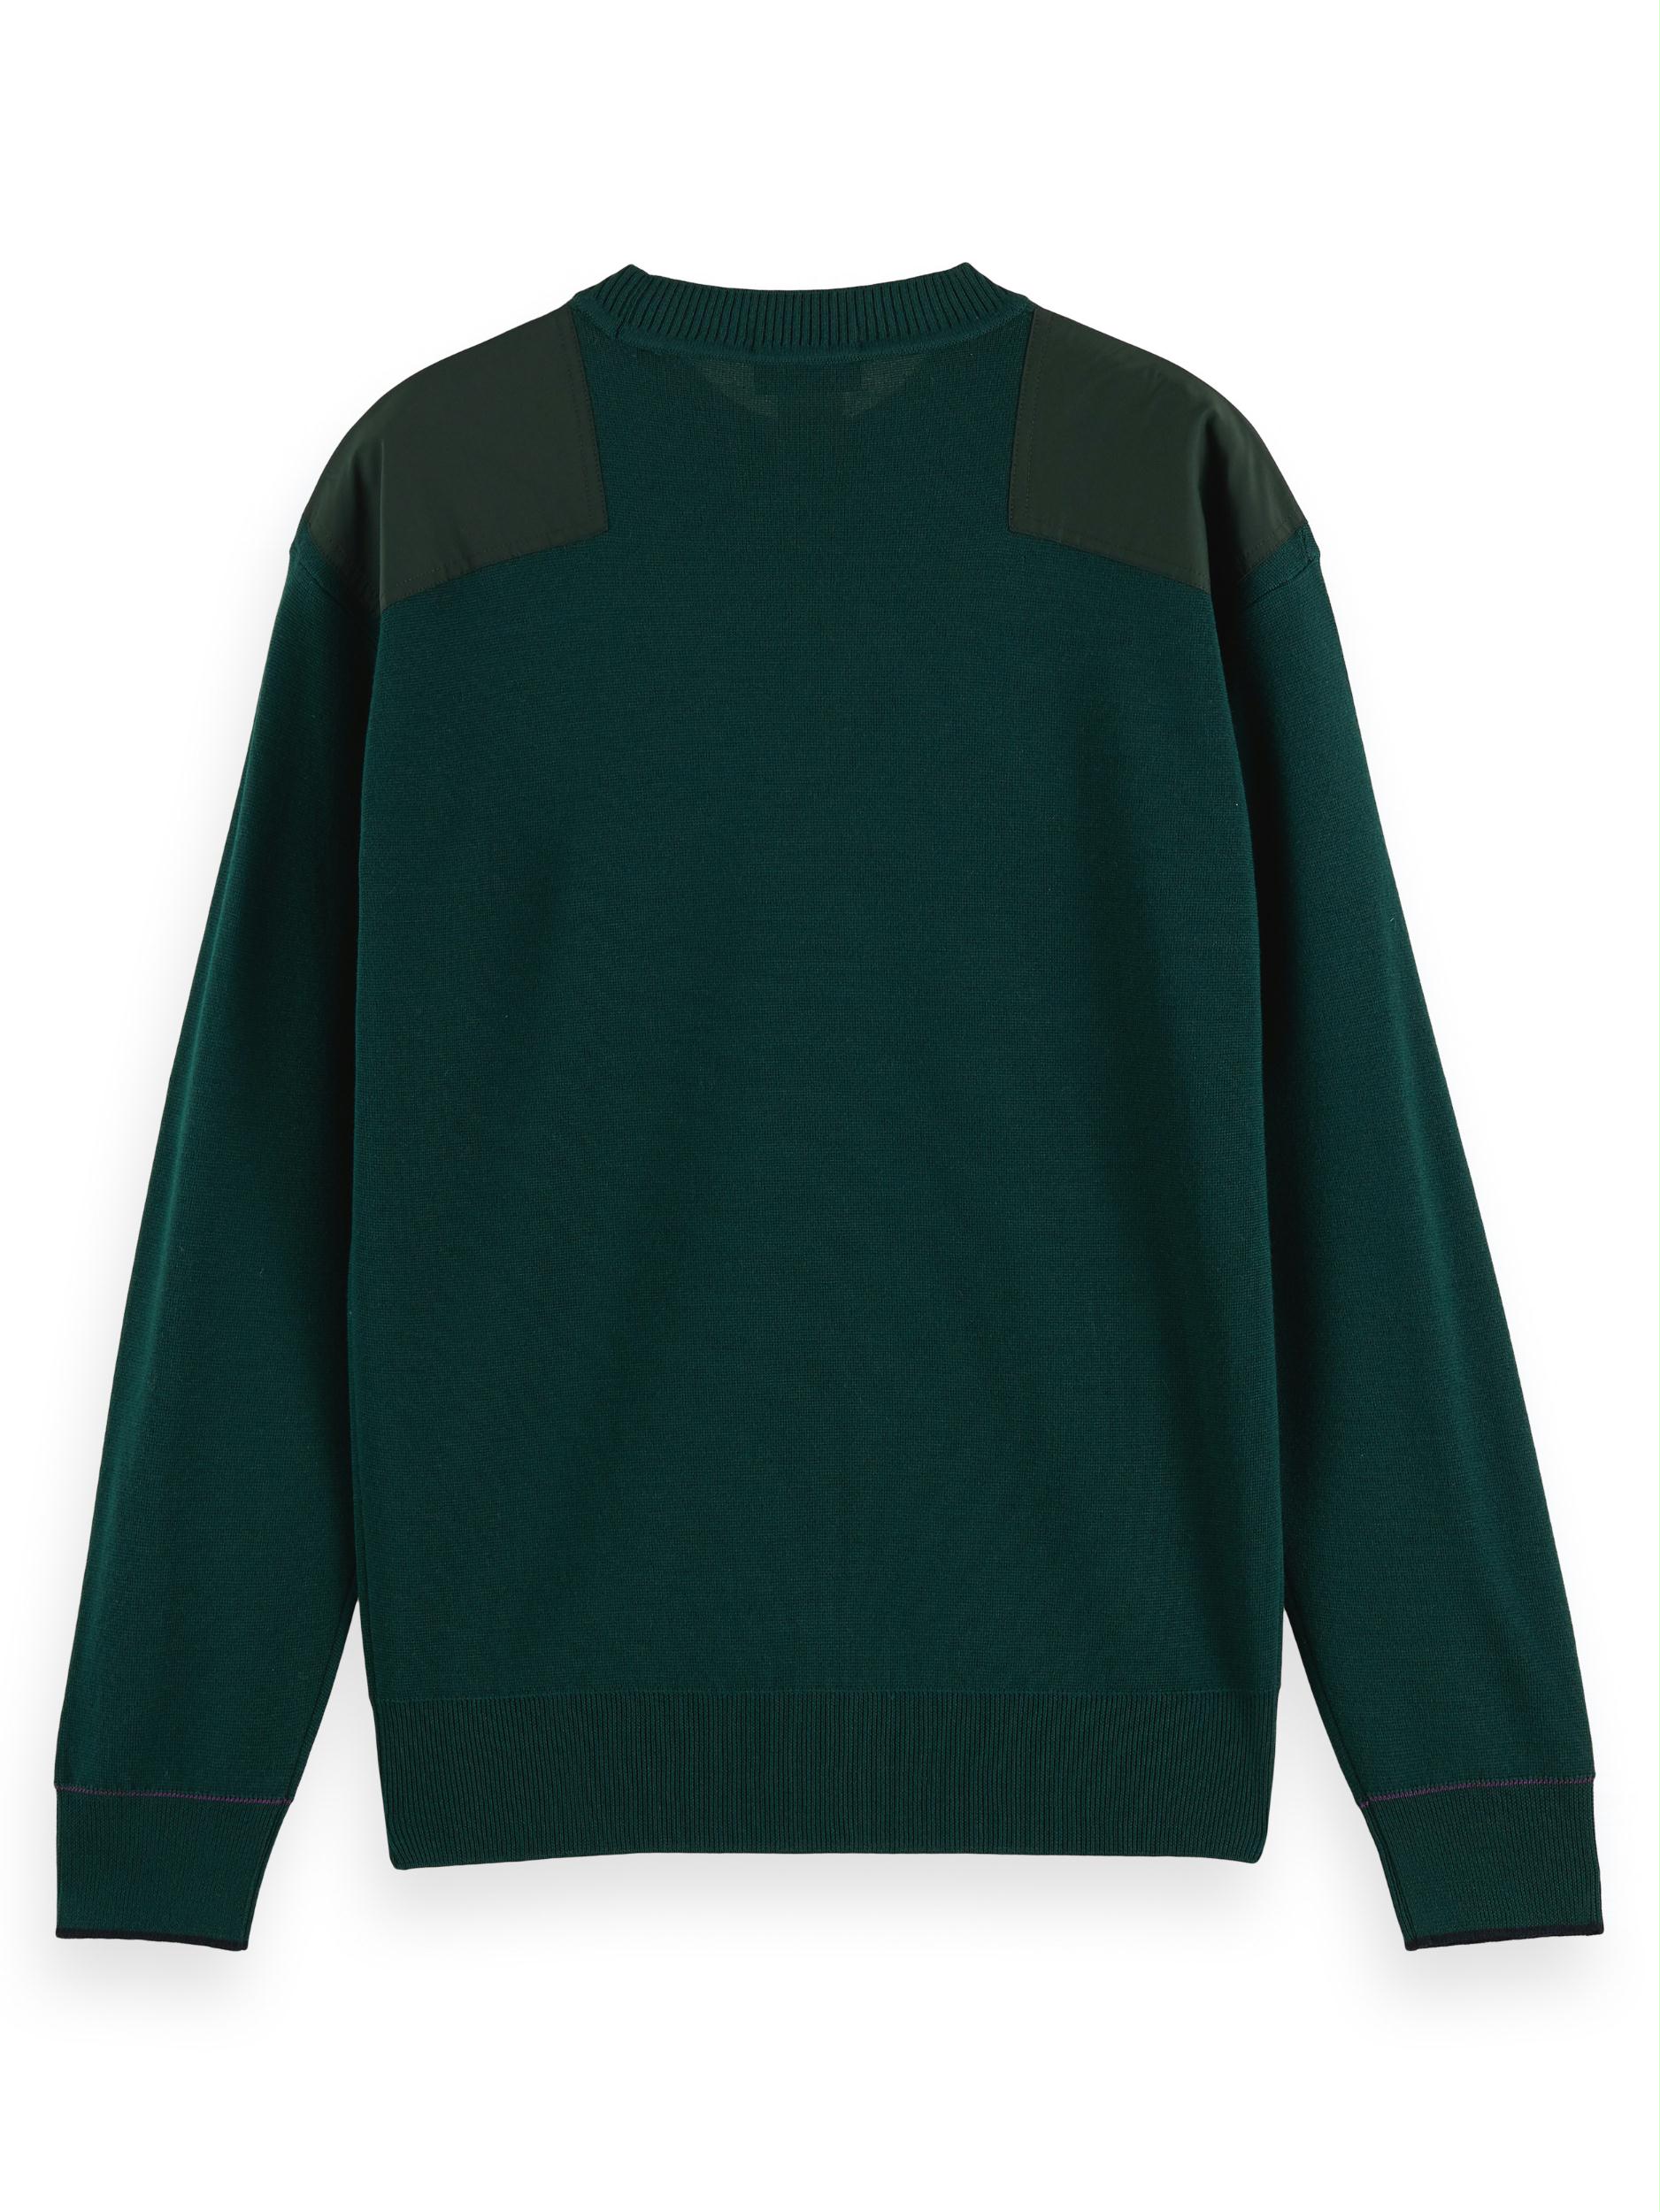 Scotch & Soda Pullover Groen Shoulder patches crewneck pull 168493/5014